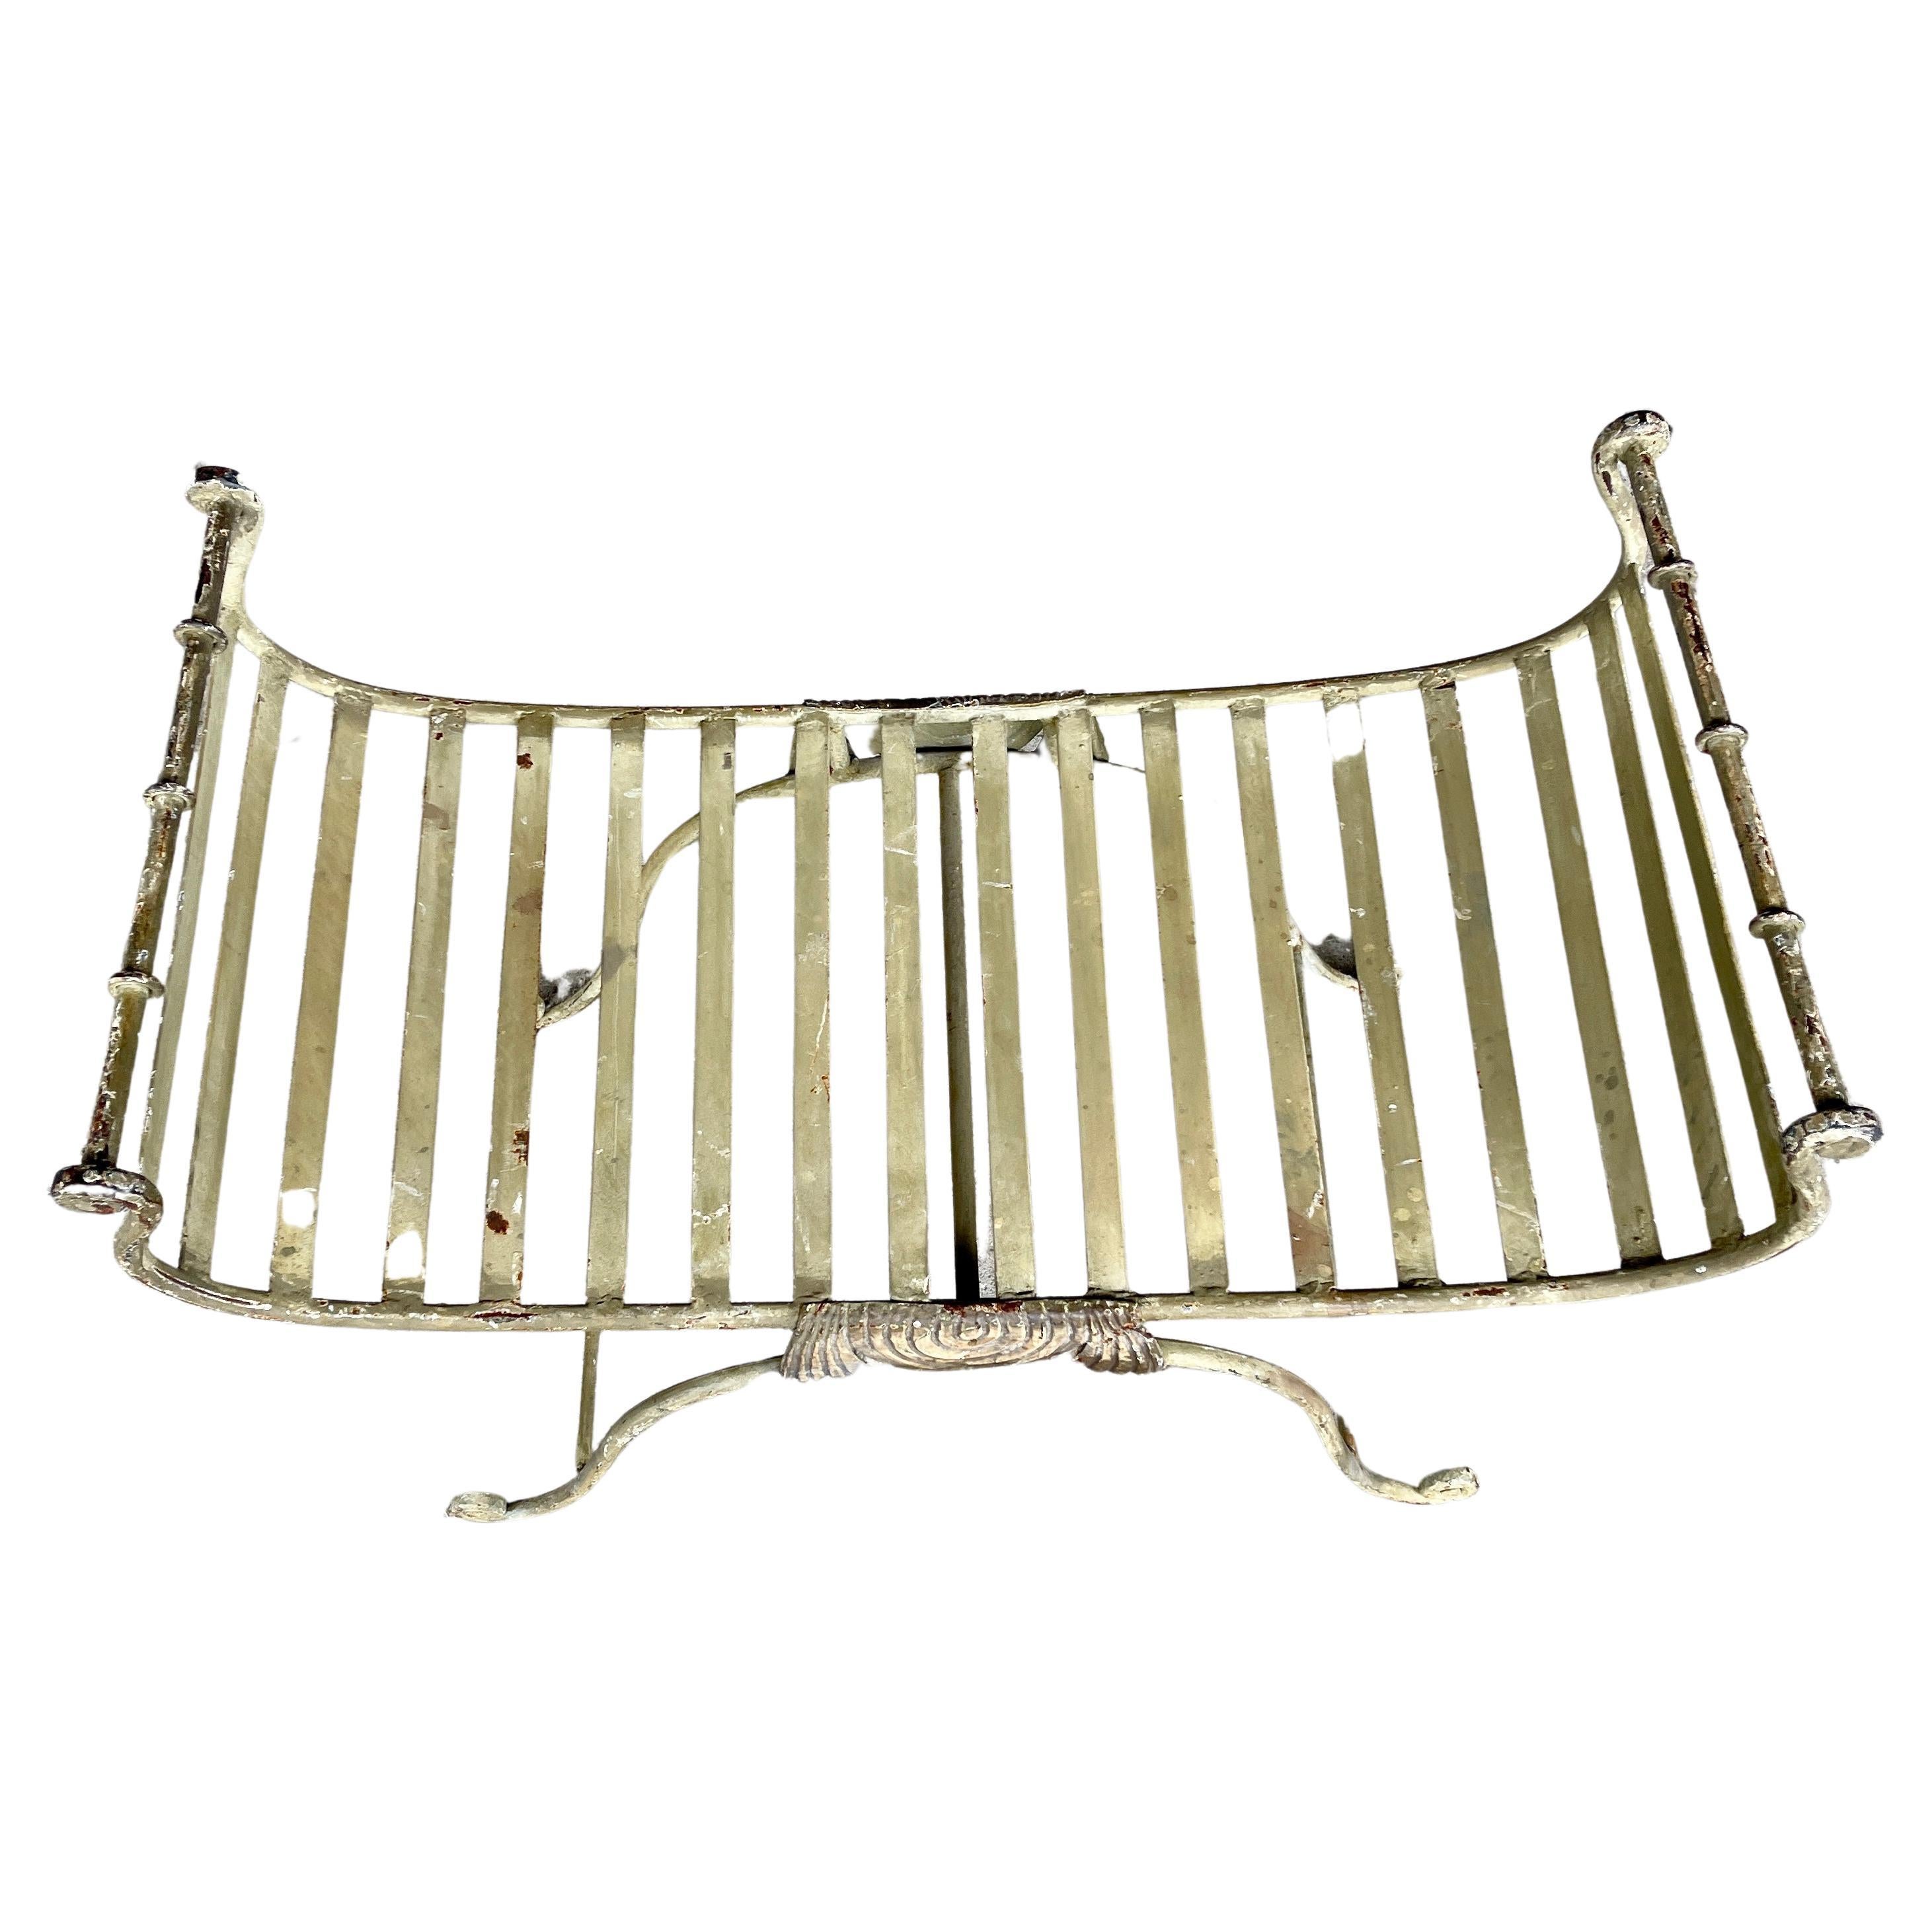 Classical Roman Large Wide Patio Garden Painted Iron Seat Bench, Circa 1930-1950 For Sale